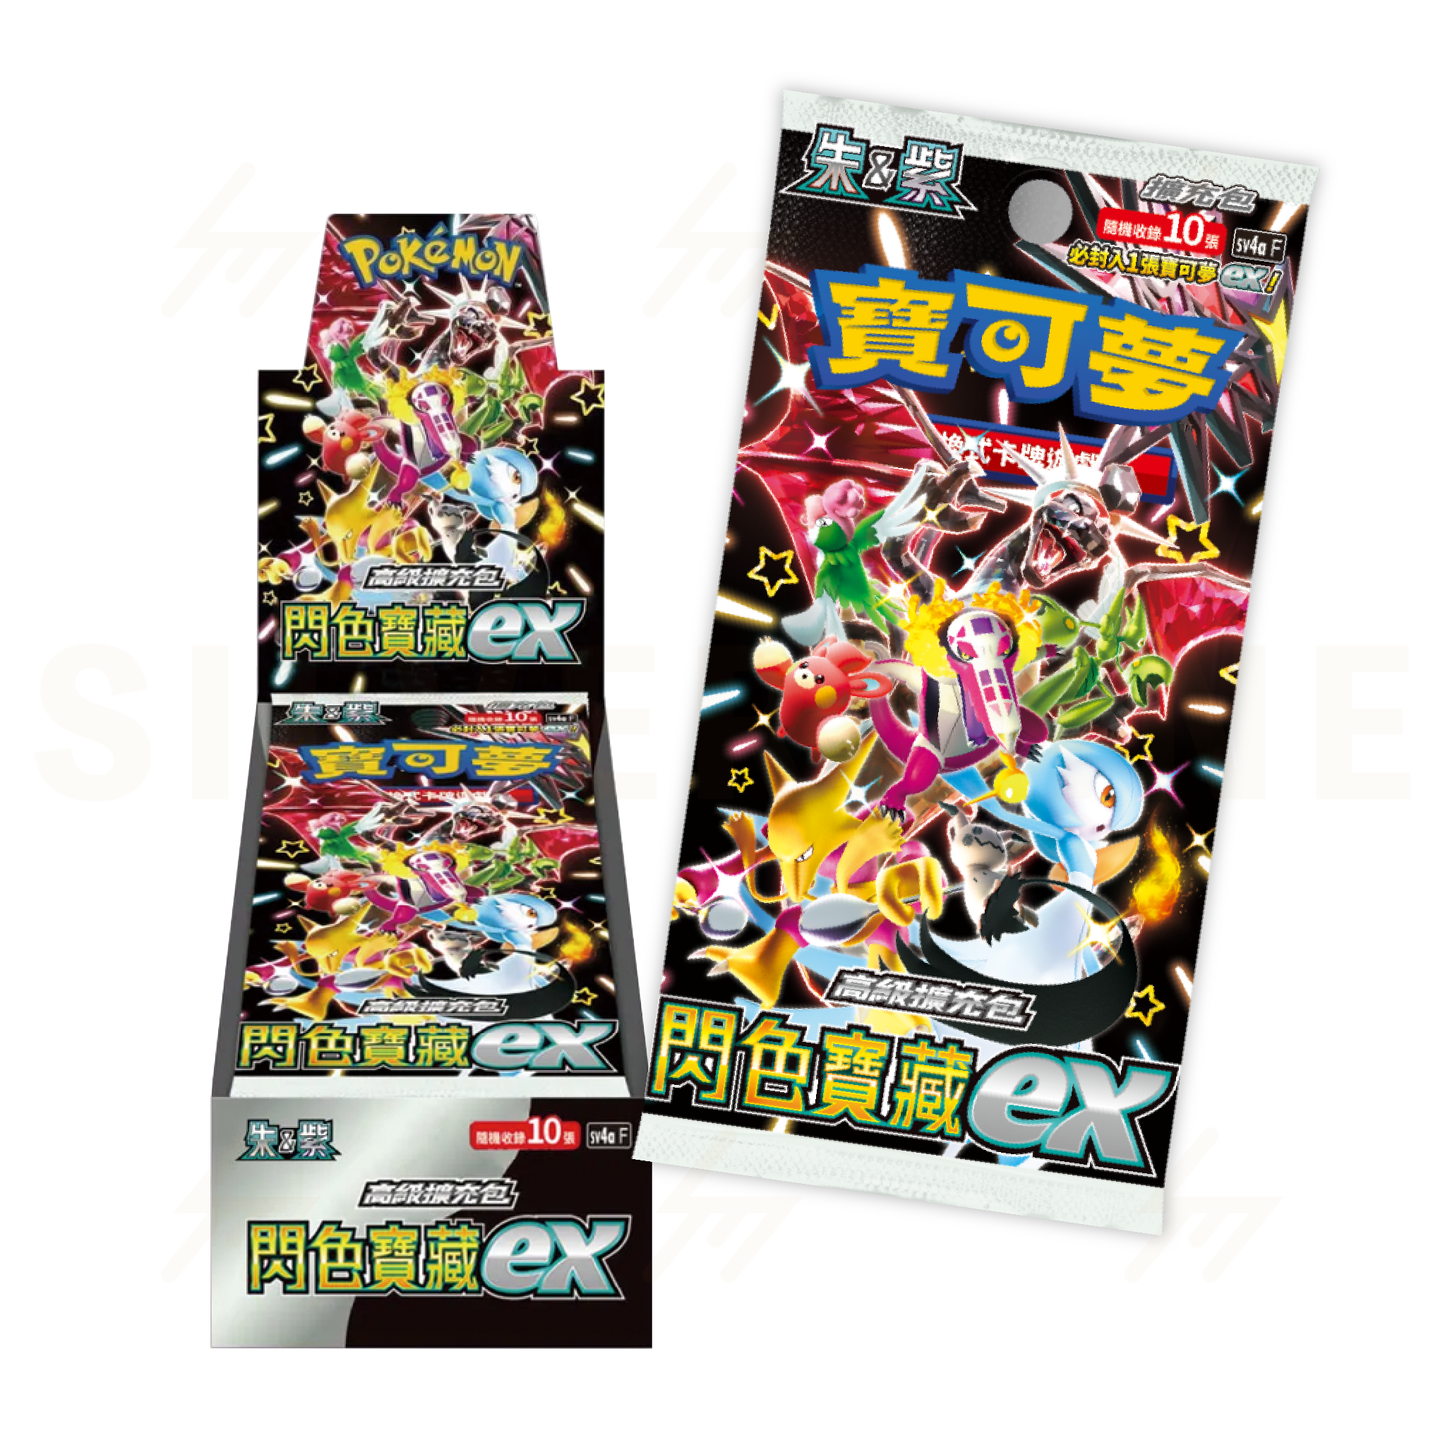 sv4a F - Pokemon TCG - Booster Box - Scarlet & Violet - High Class Pack Shiny Treasure ex (Traditional Chinese)